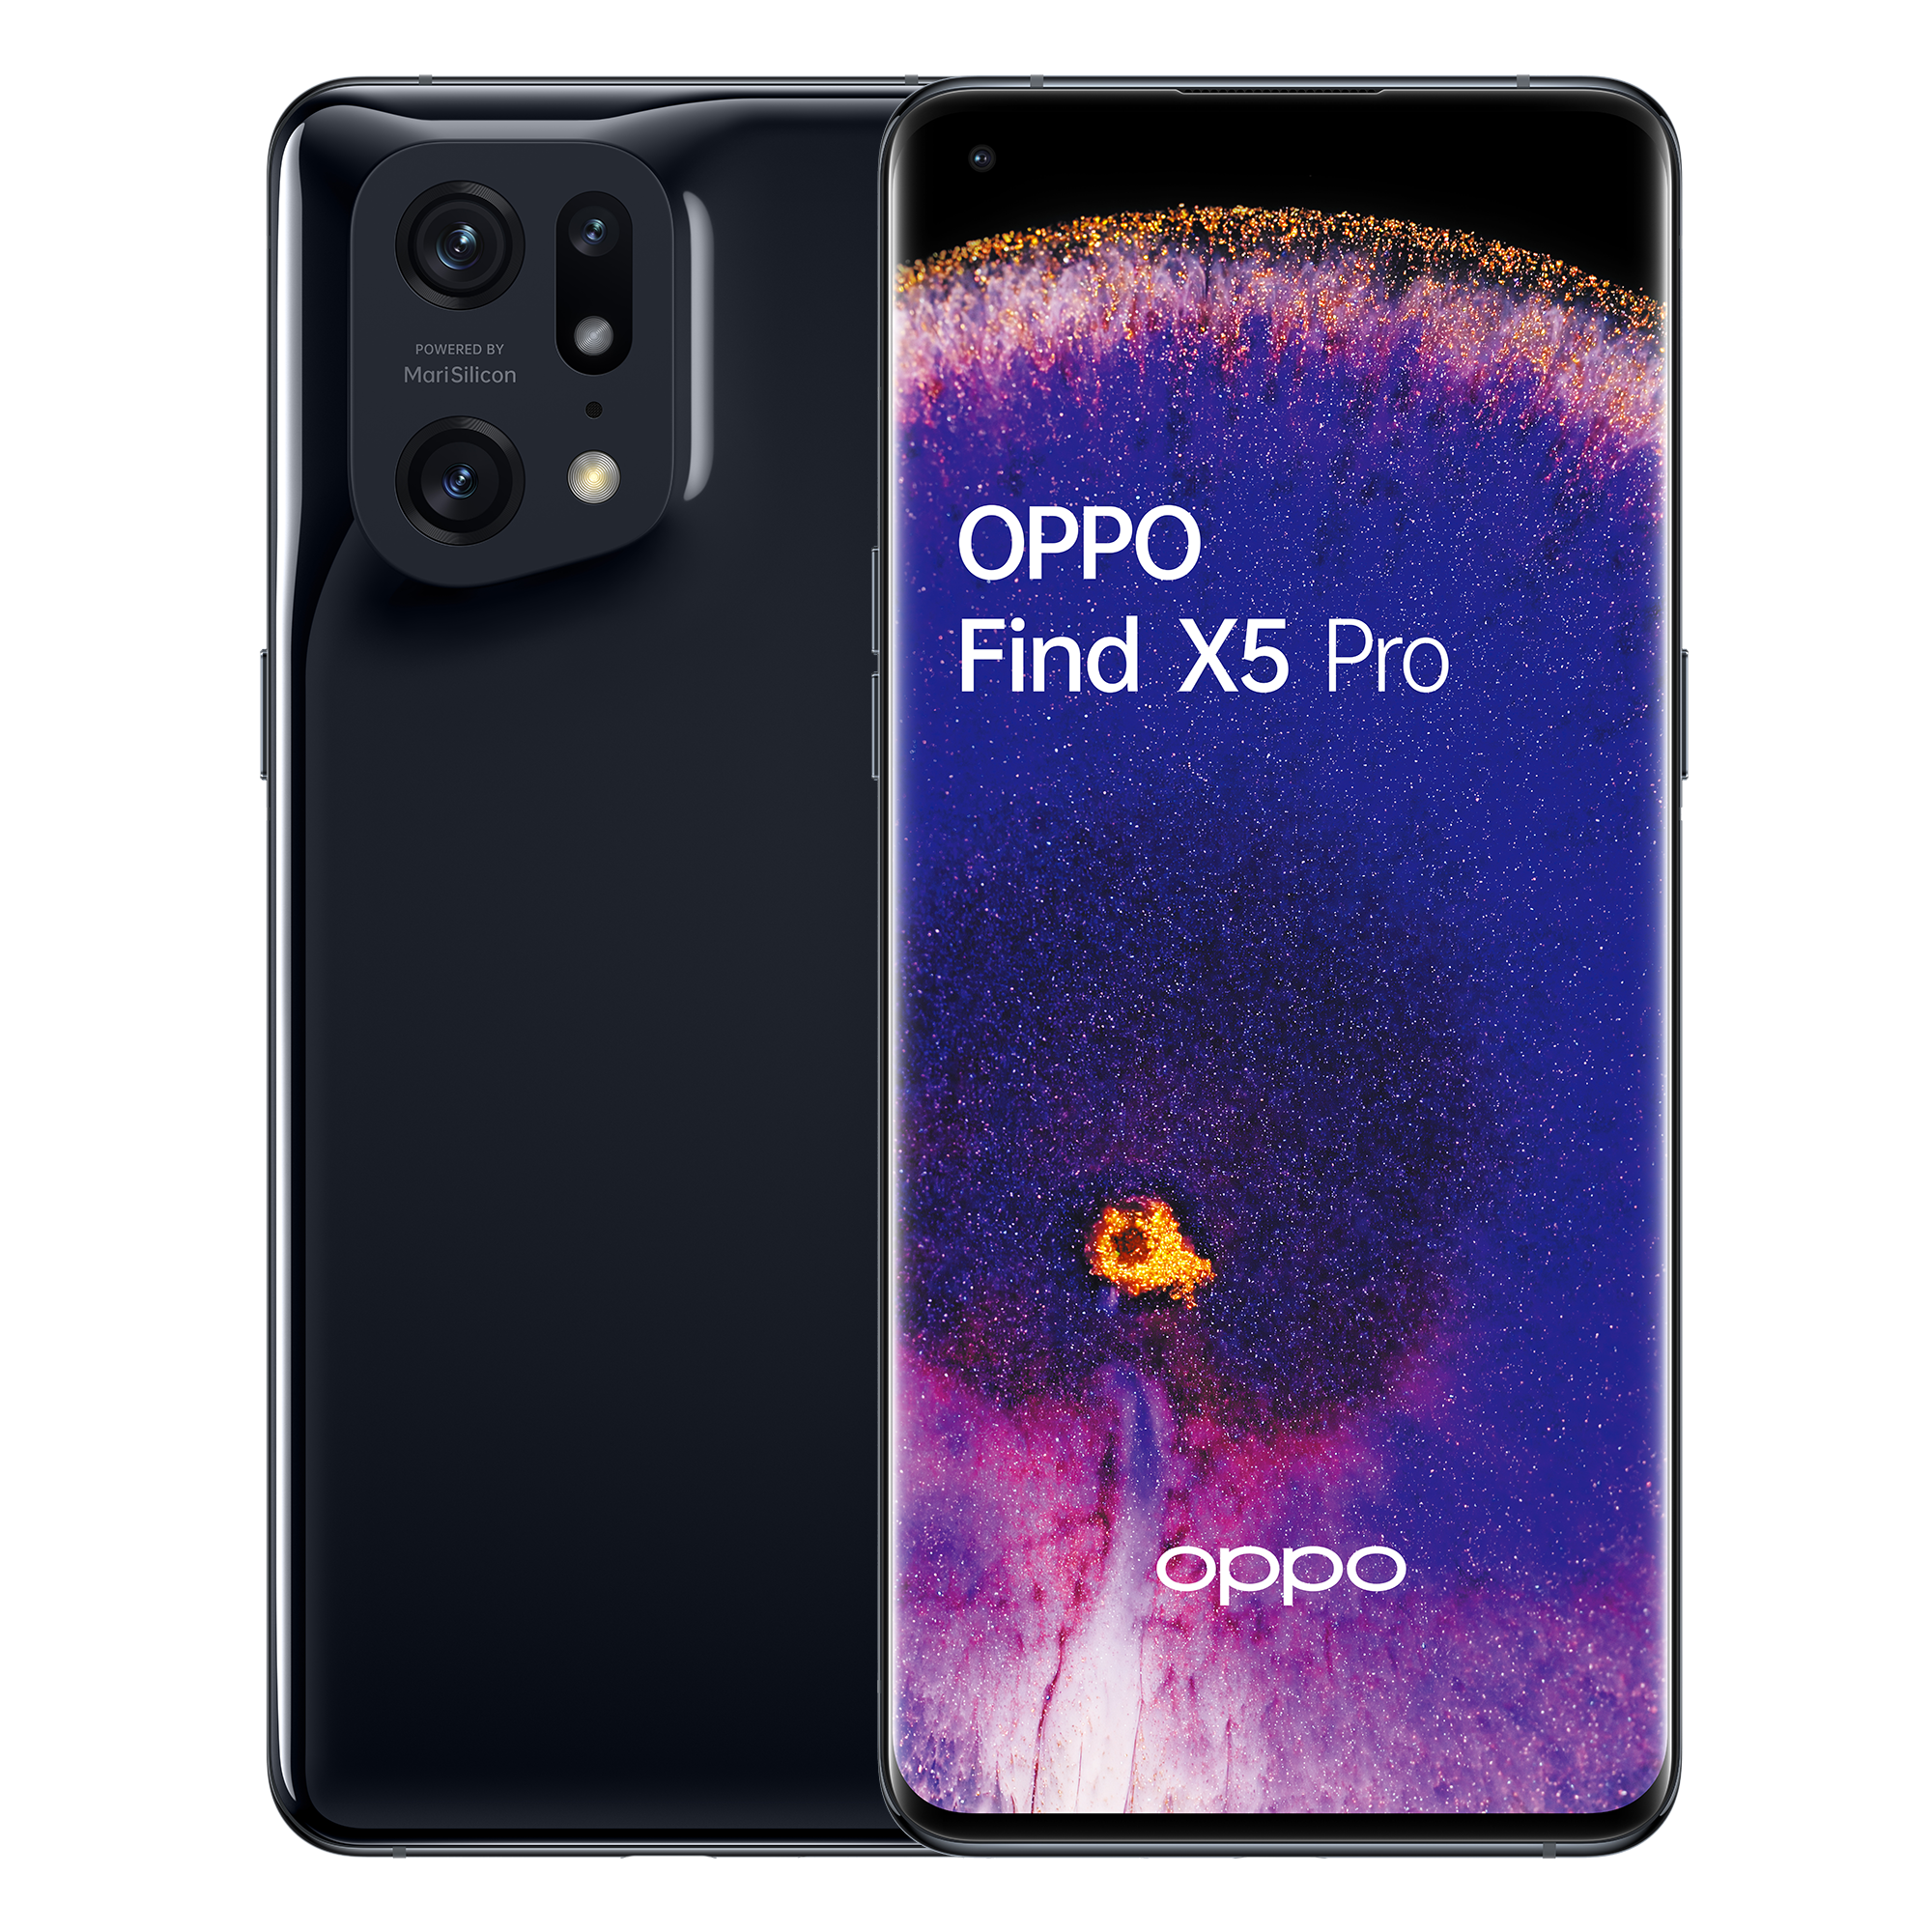 OPPO Reno 8 Pro launched globally: Find X5 Pro on a budget?